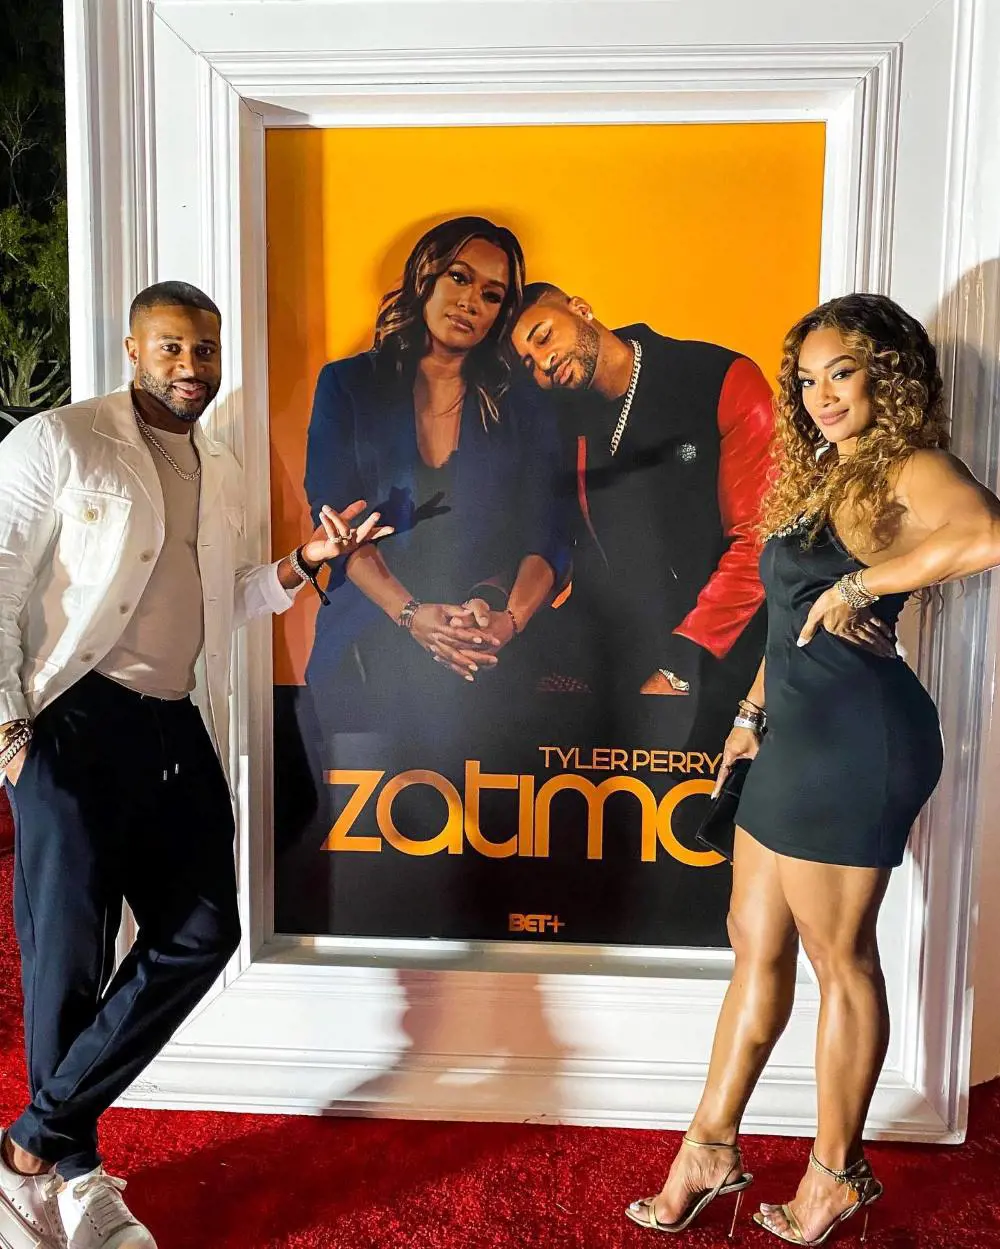 Zatima stars Ellis and Renee Hayslett pictured together in front of the series' poster